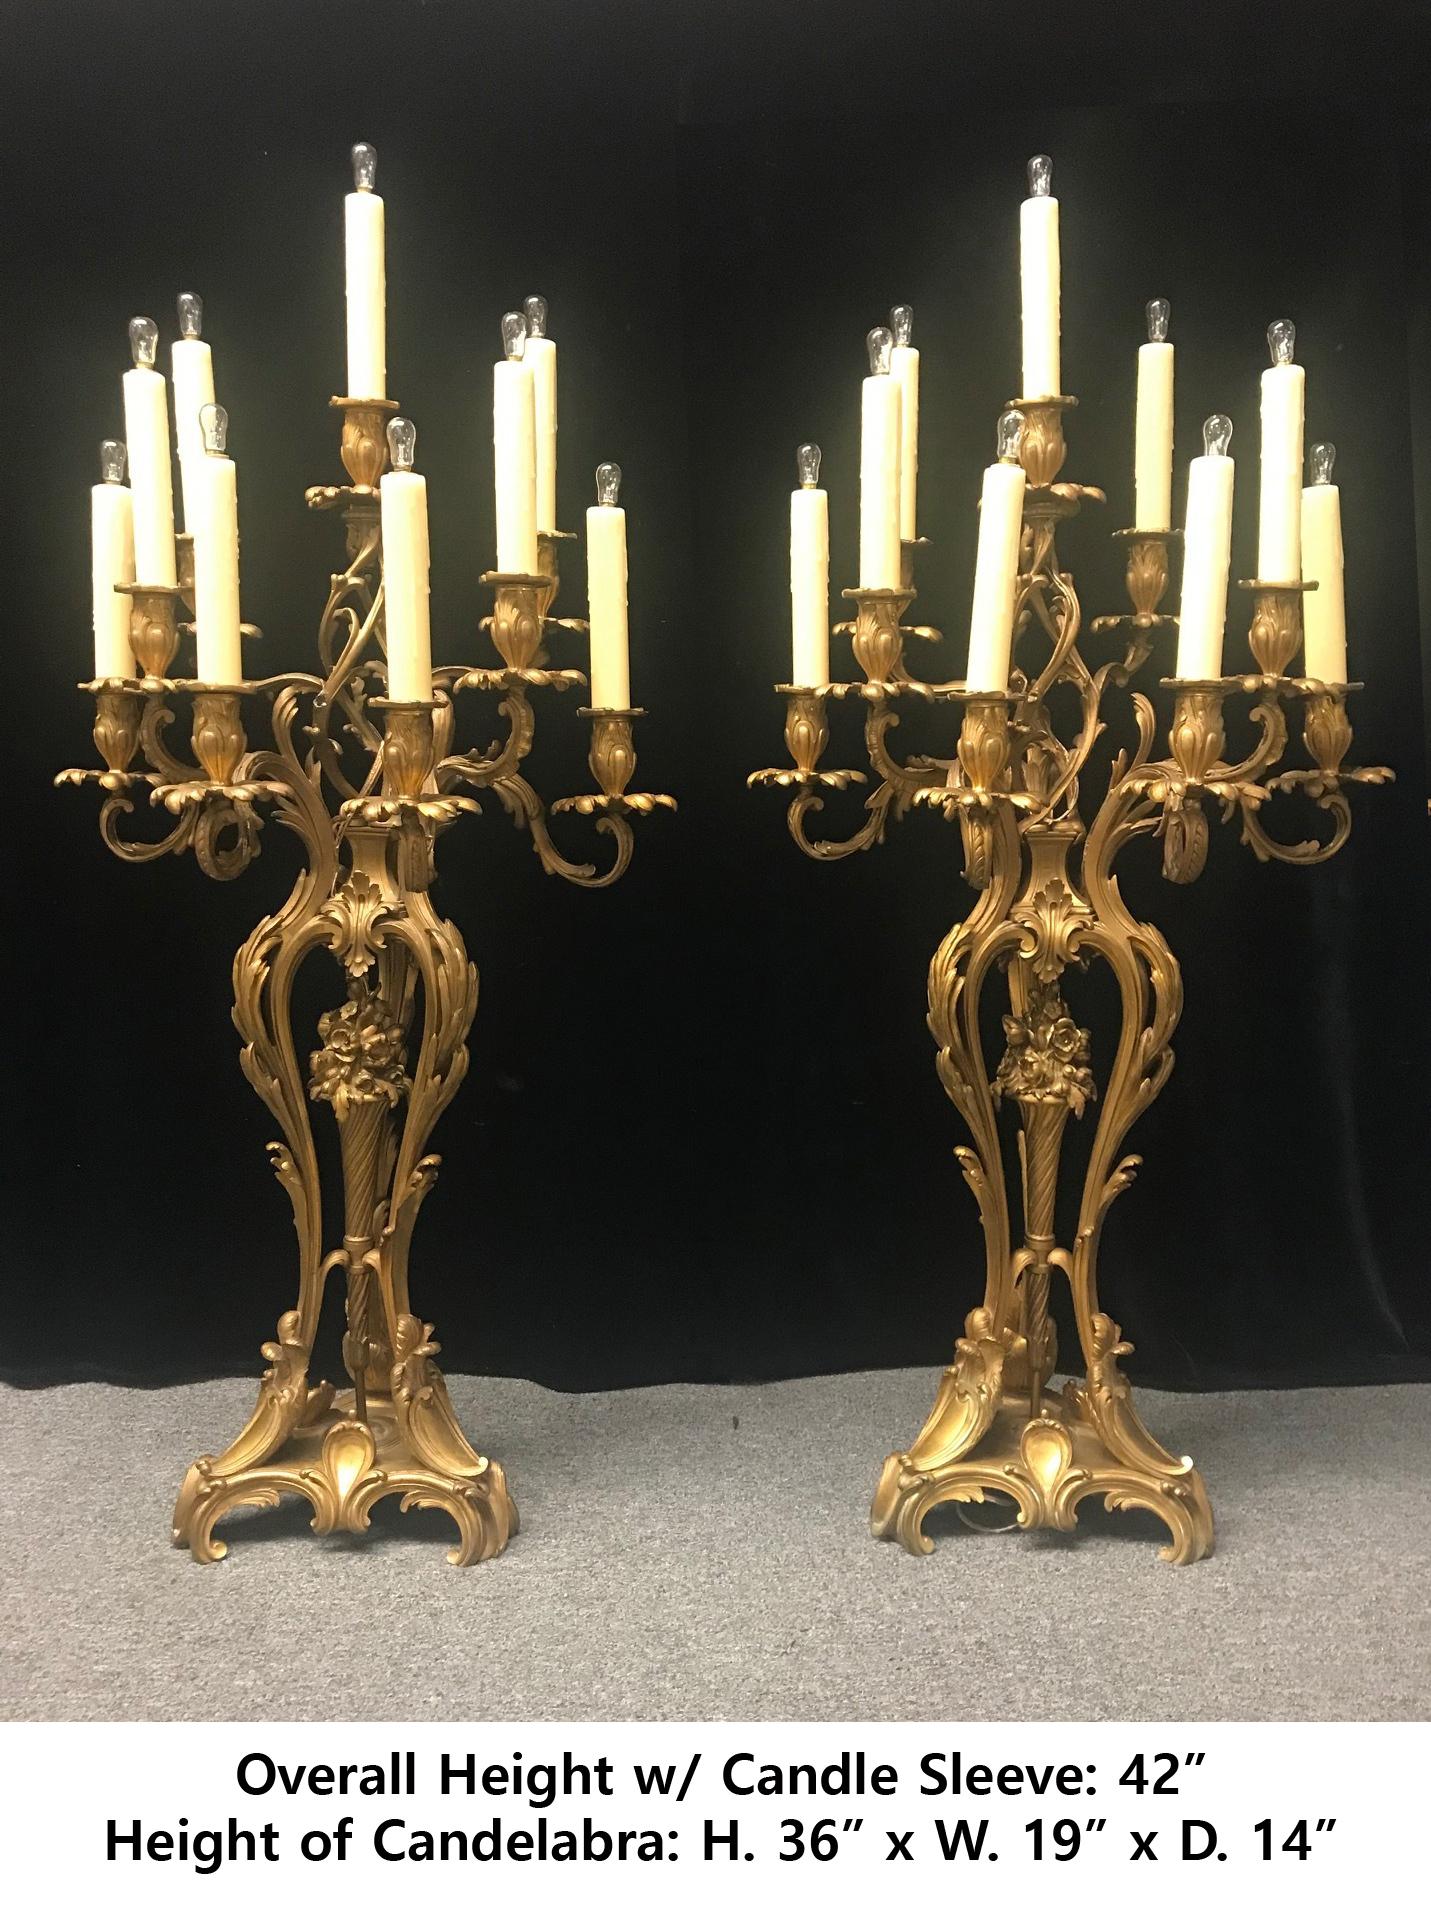 Monumental and exquisite French pair of Ormolu 9 light candelabra, late 19th century.
Ornately designed with acanthus leaf and scrolls with fine foliate scroll decoration. 
Meticulous attention has been given to every detail.
with hand made